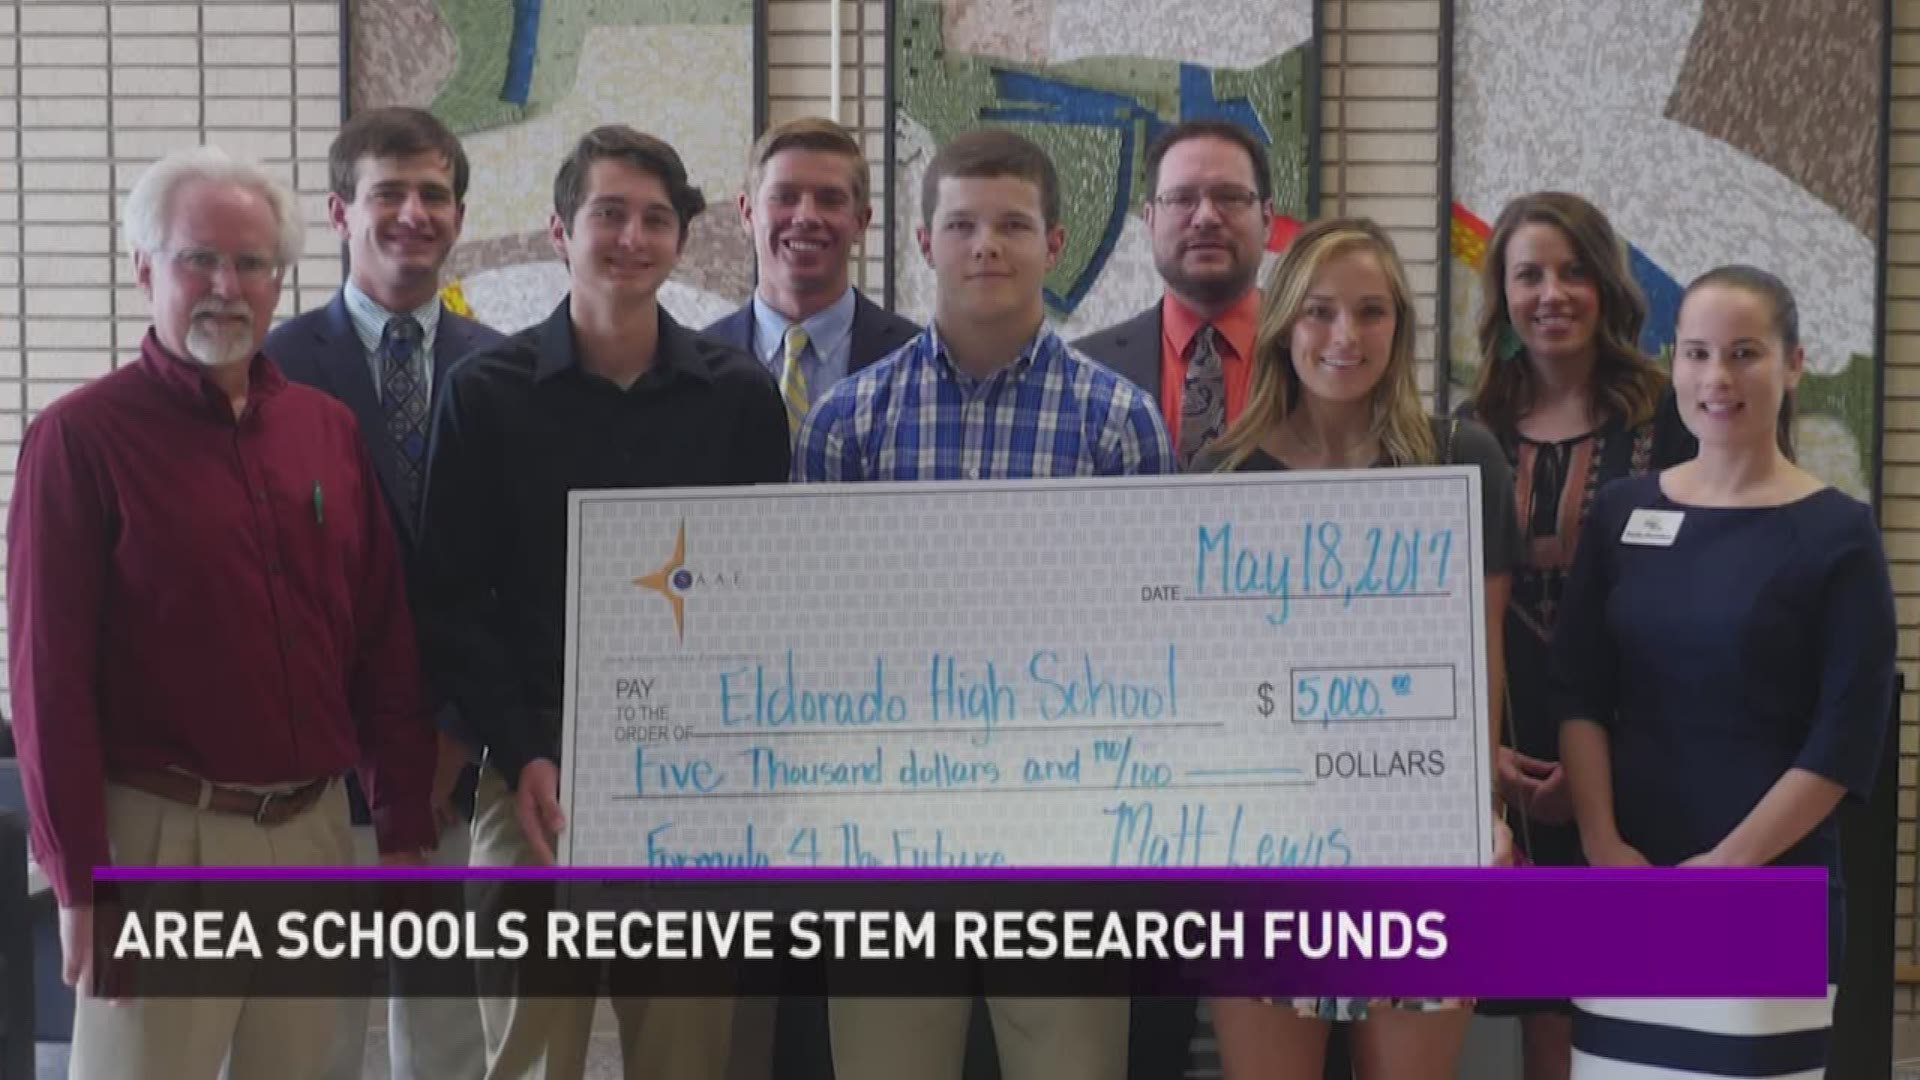 Three schools received the funds they need to further their ideas in STEM fields.